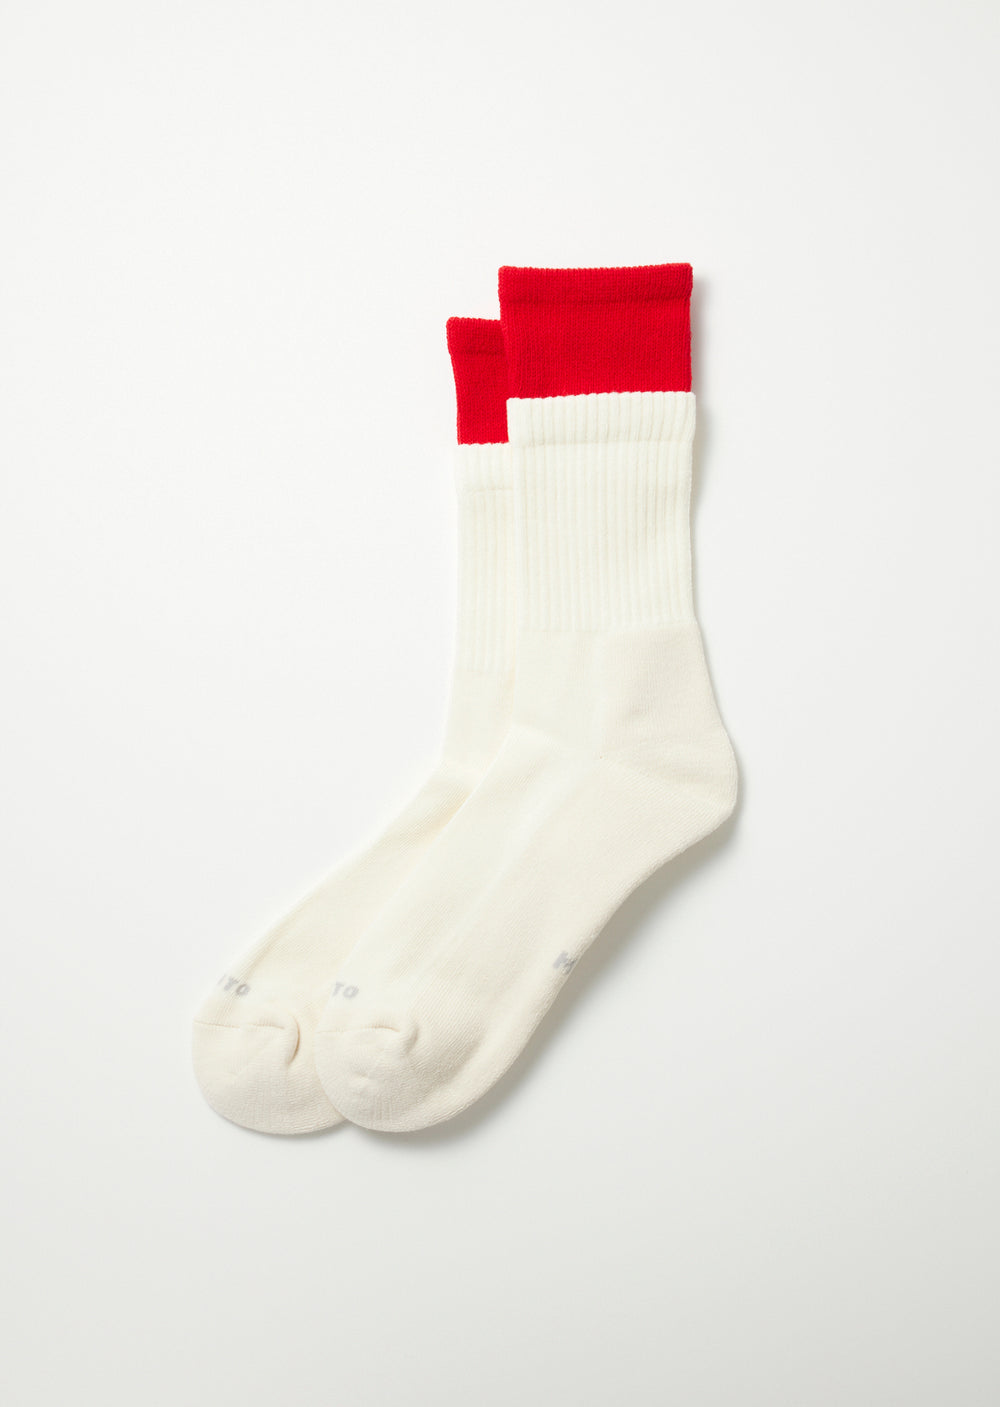 Double Layer Crew Socks - Red/Off White - R1494